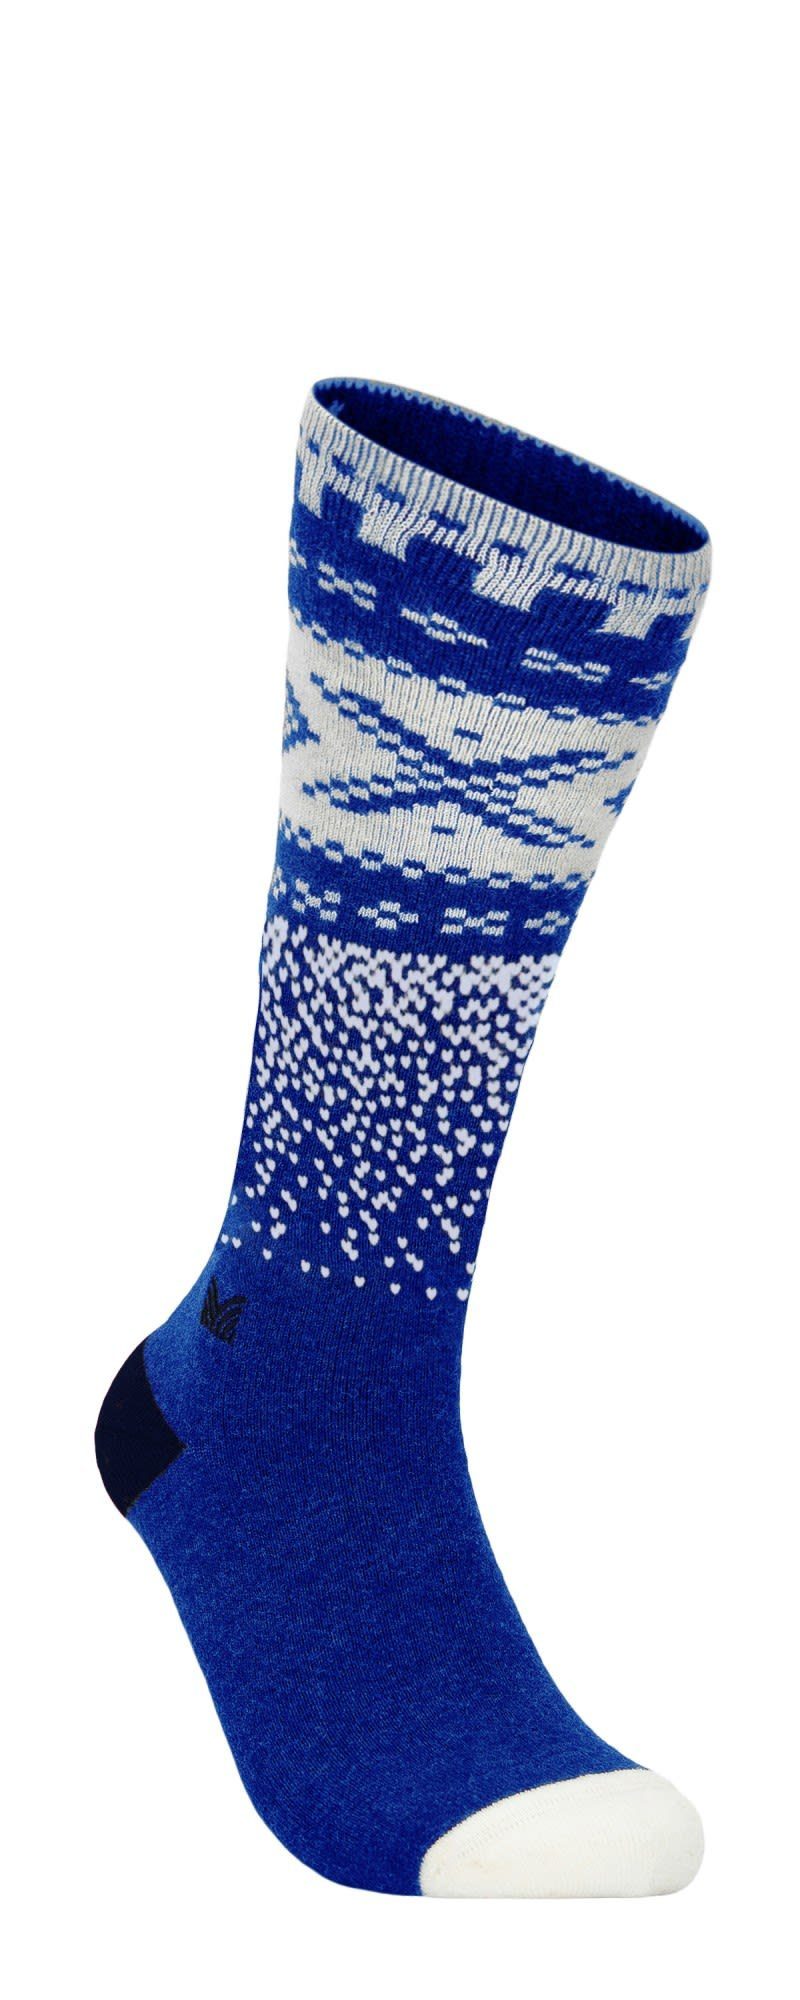 Ultramarine Dale Offwhite Norway Of of Cortina Navy Dale Socks High - - Norway Thermosocken